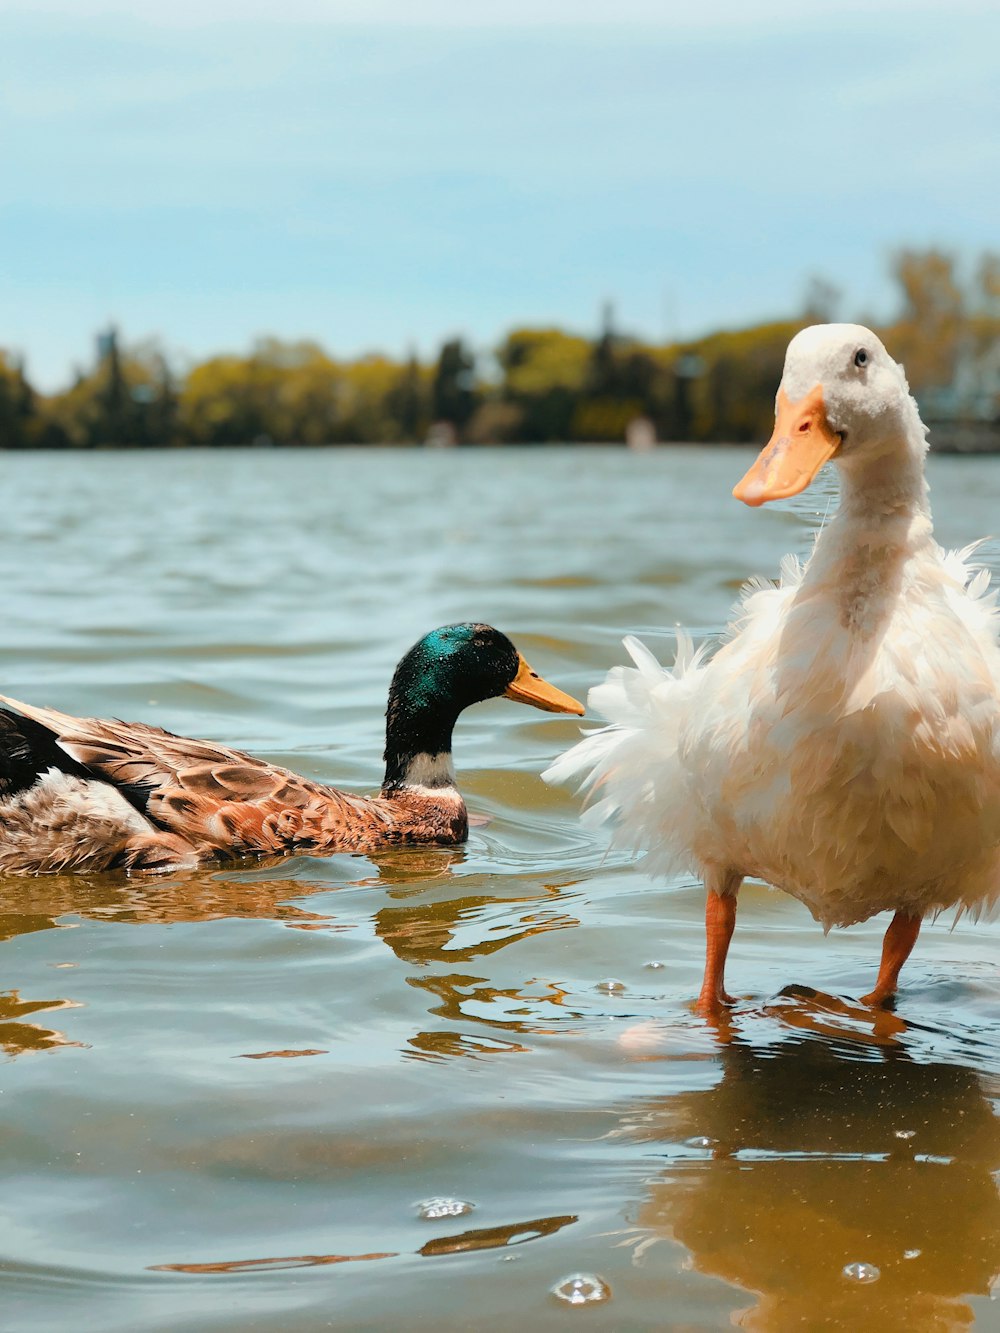 two white and brown ducks on water during daytime